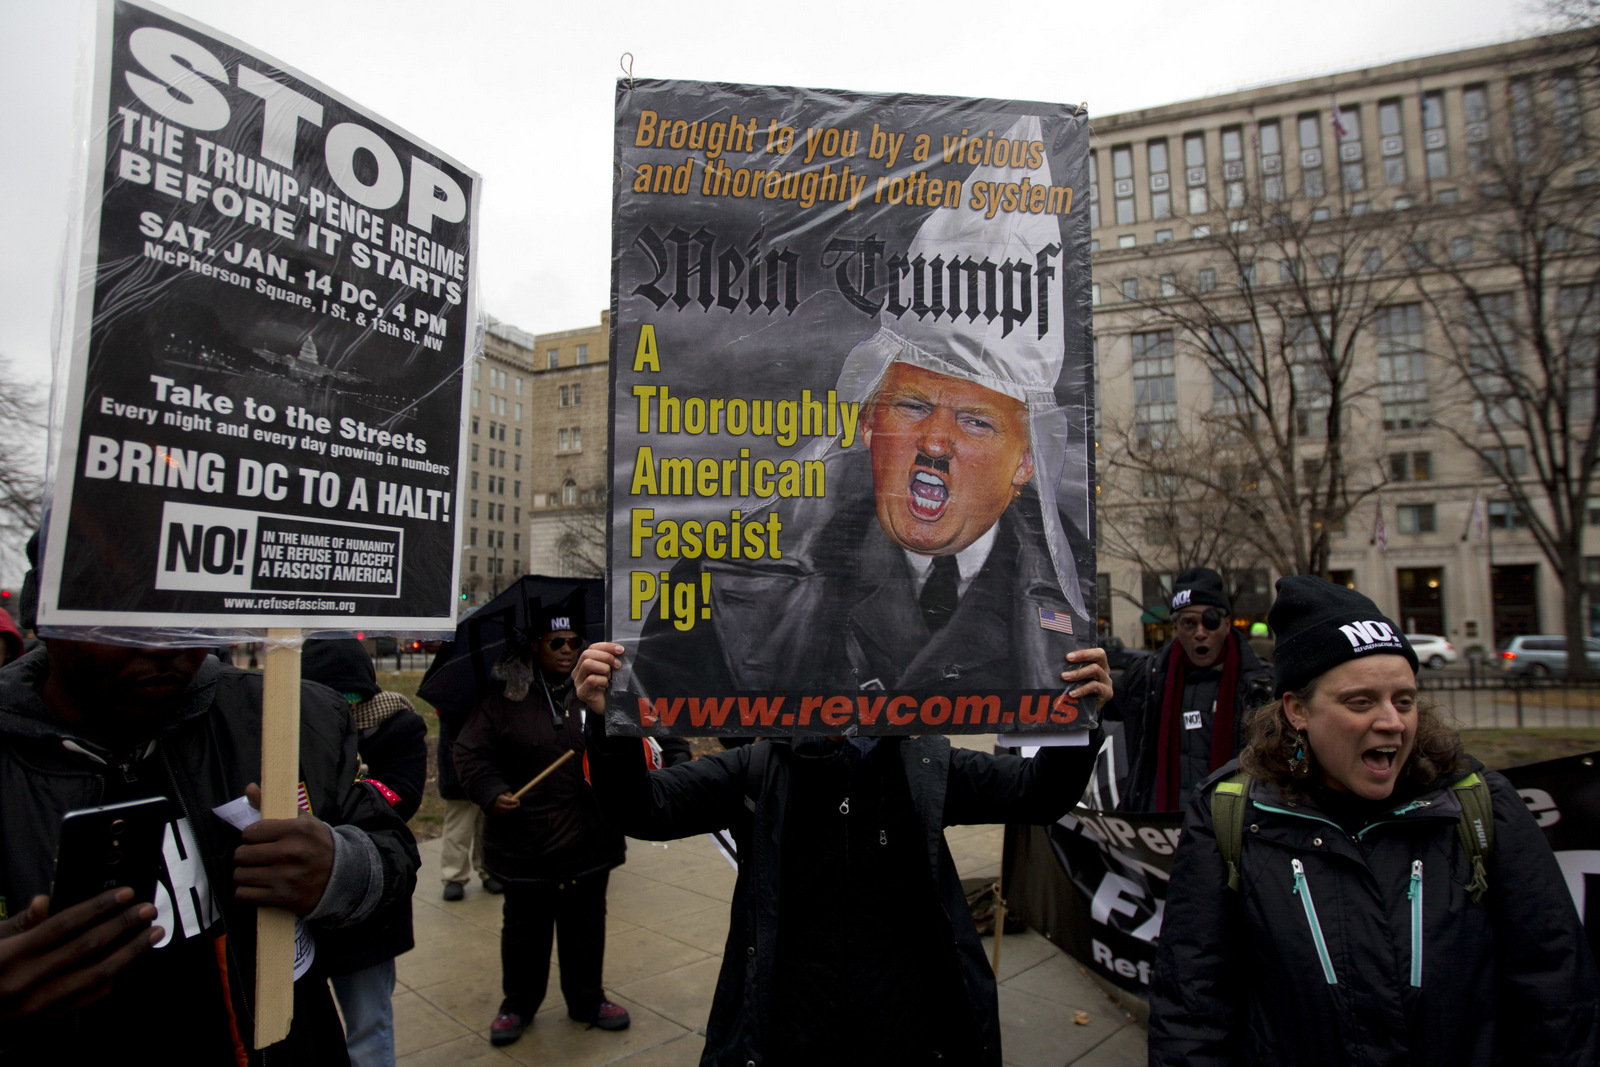 Demonstrators hold banners as they protest in opposition of President-elect Donald Trump, at McPherson Square, in Washington, Saturday, Jan. 14, 2017. ( AP/Jose Luis Magana)